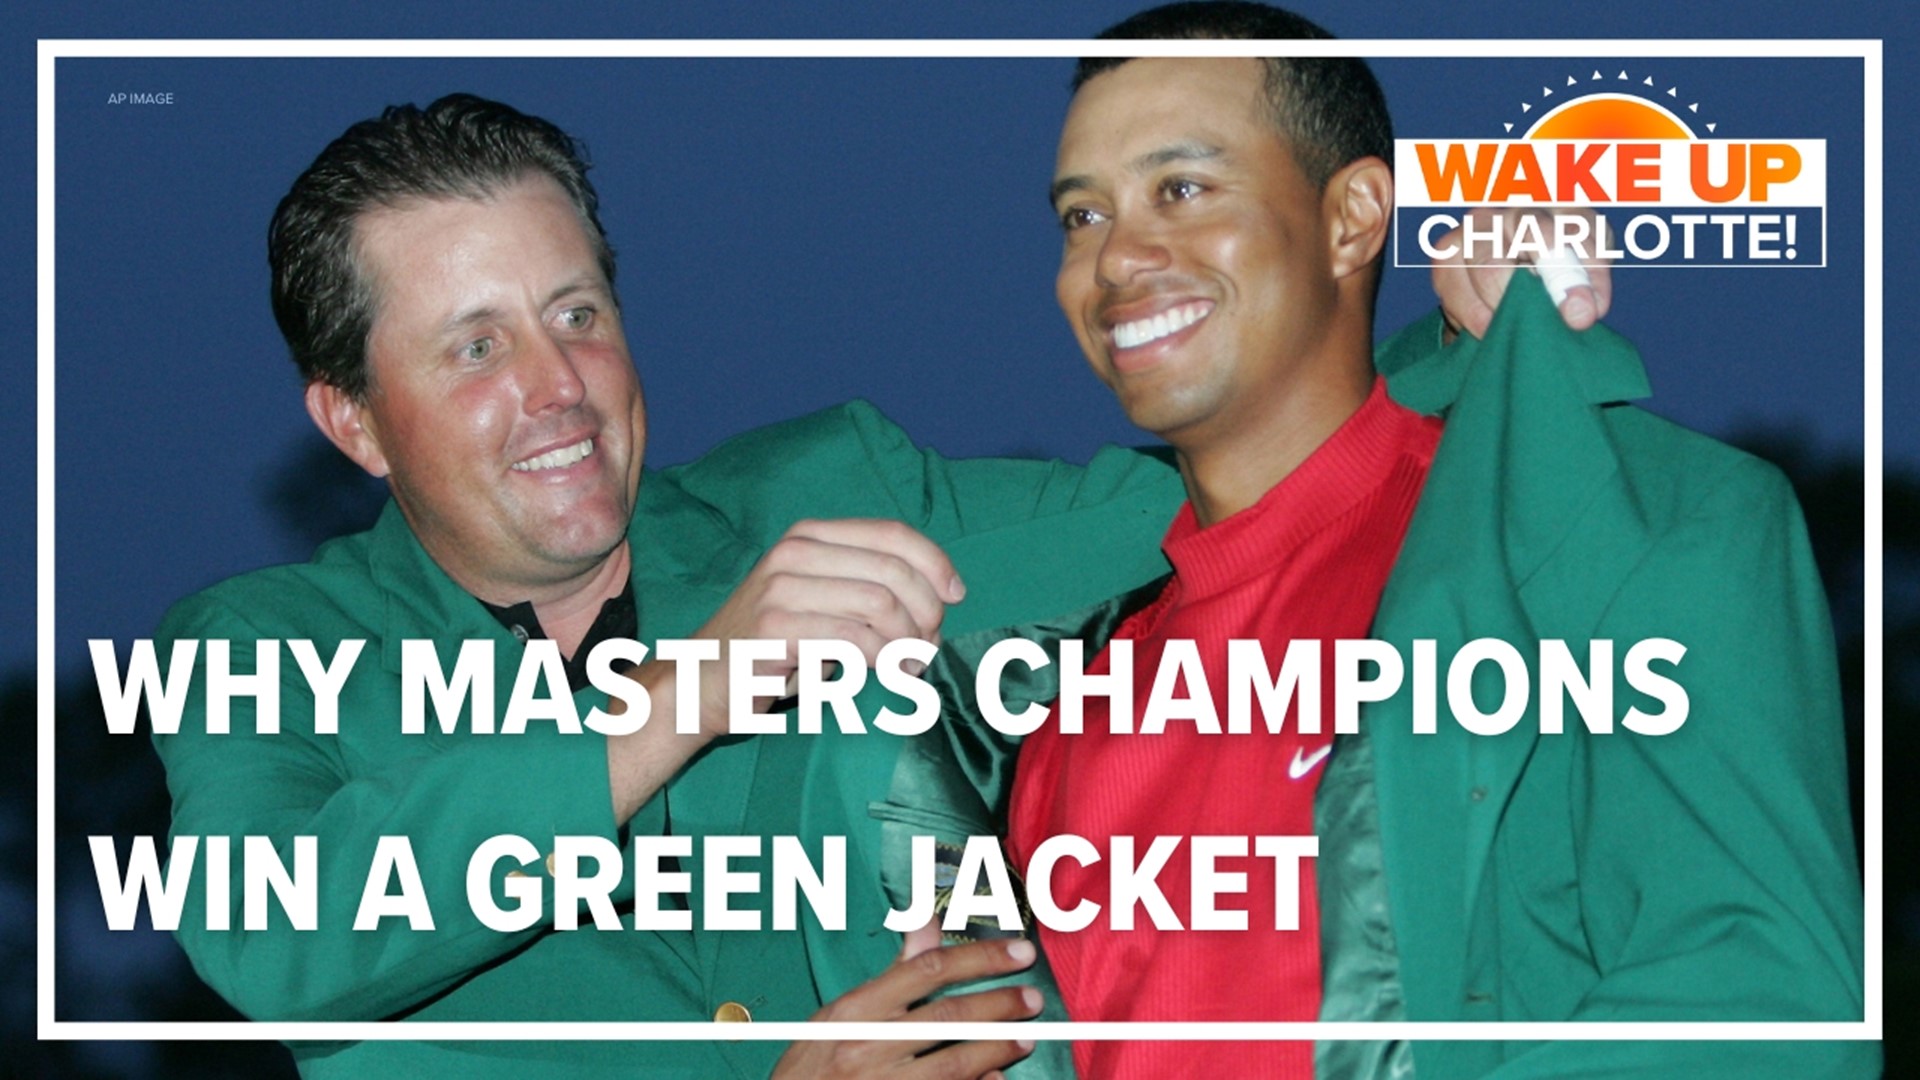 Augusta's Green jacket has its roots in England, where the Royal Liverpool Golf Club wore red coats back in the 1930s.